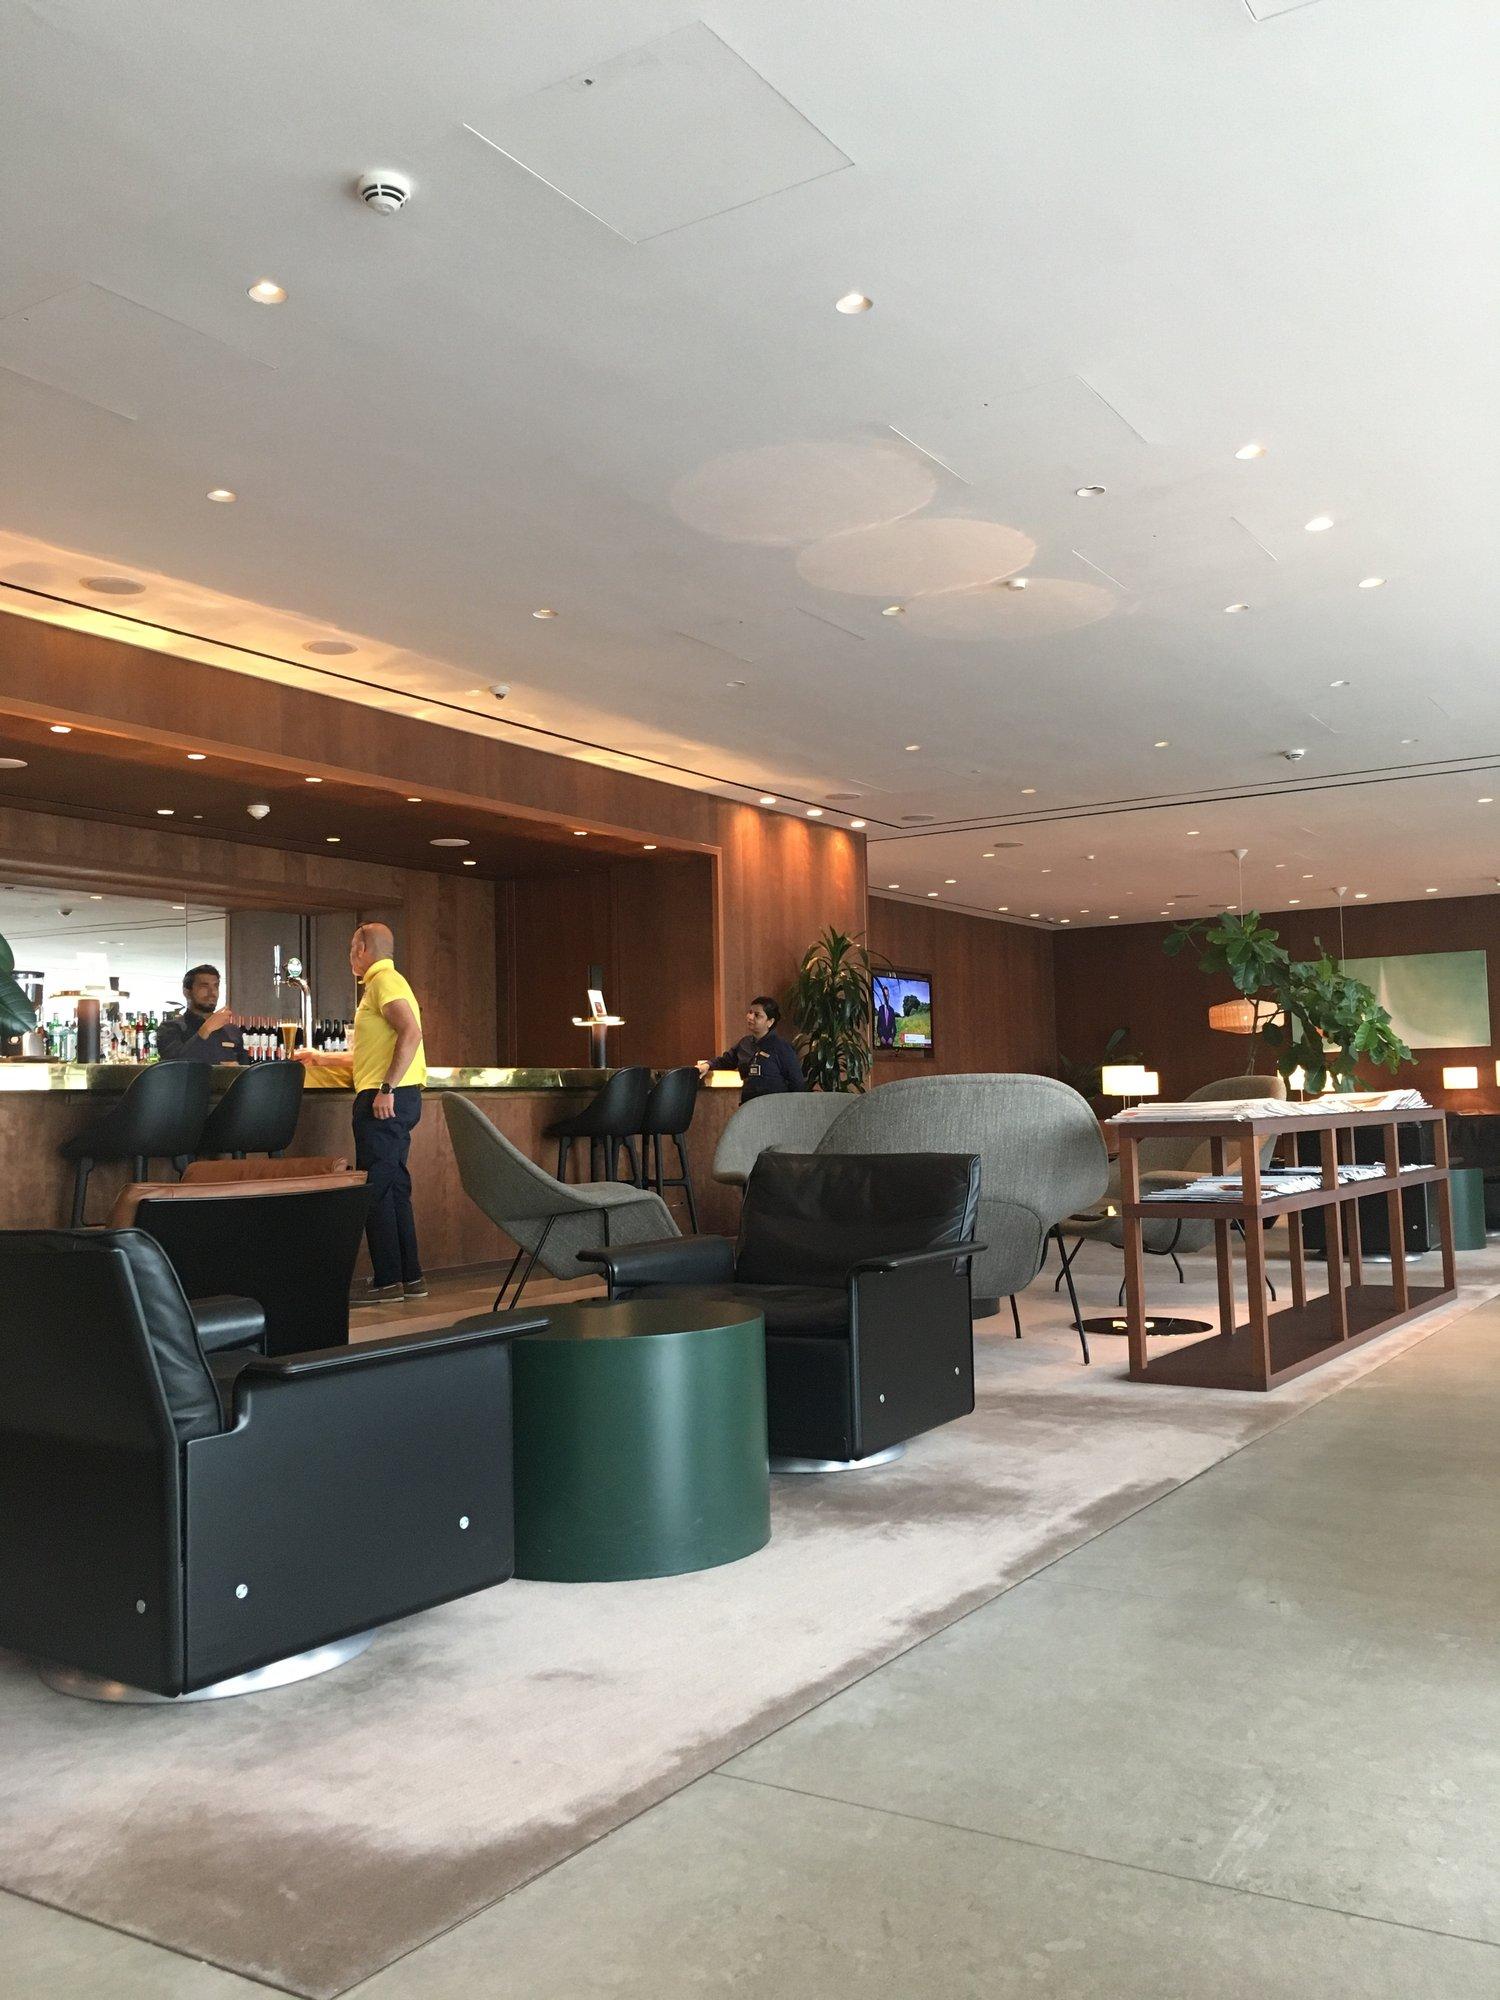 Cathay Pacific Business Class Lounge image 6 of 48